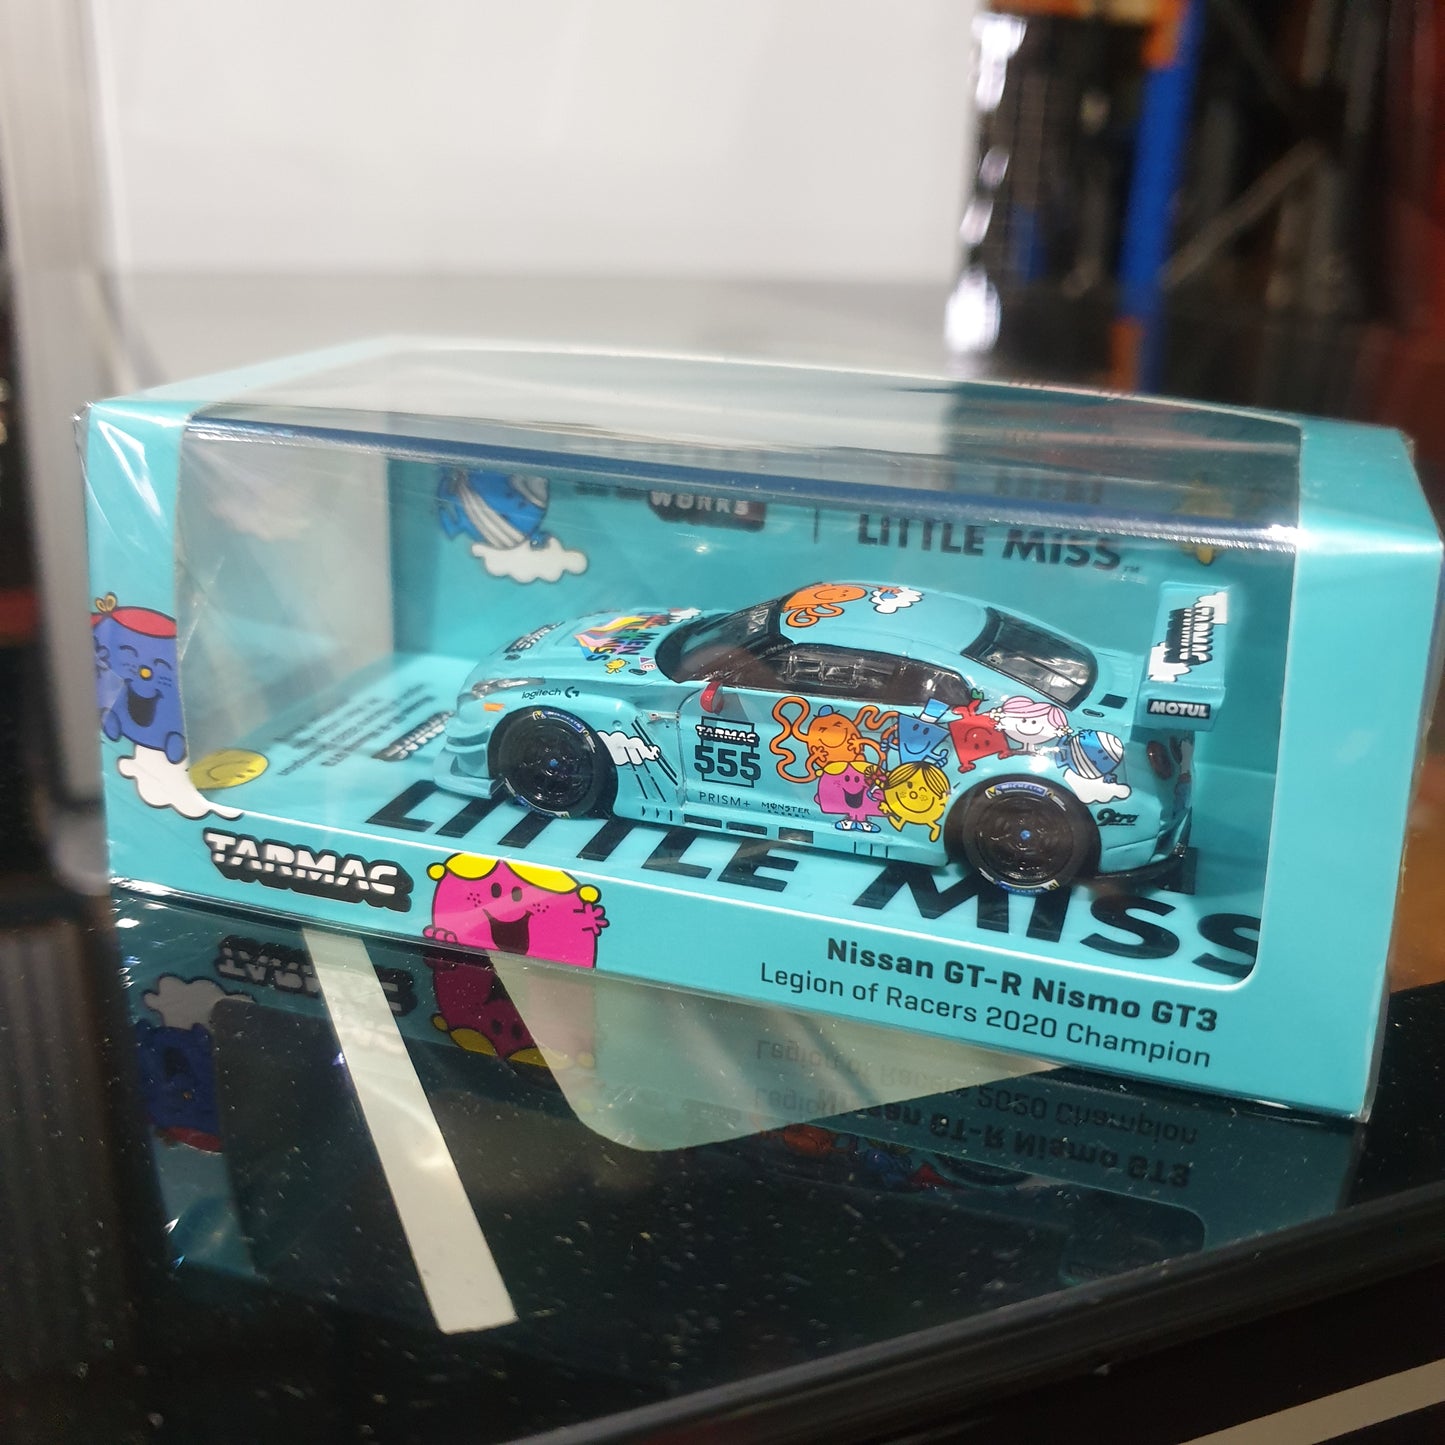 Tarmac Works Nissan GT-R Nismo GT3 Legion of Racers 2020 Overall Champion #555 Mr. Men & Little Miss